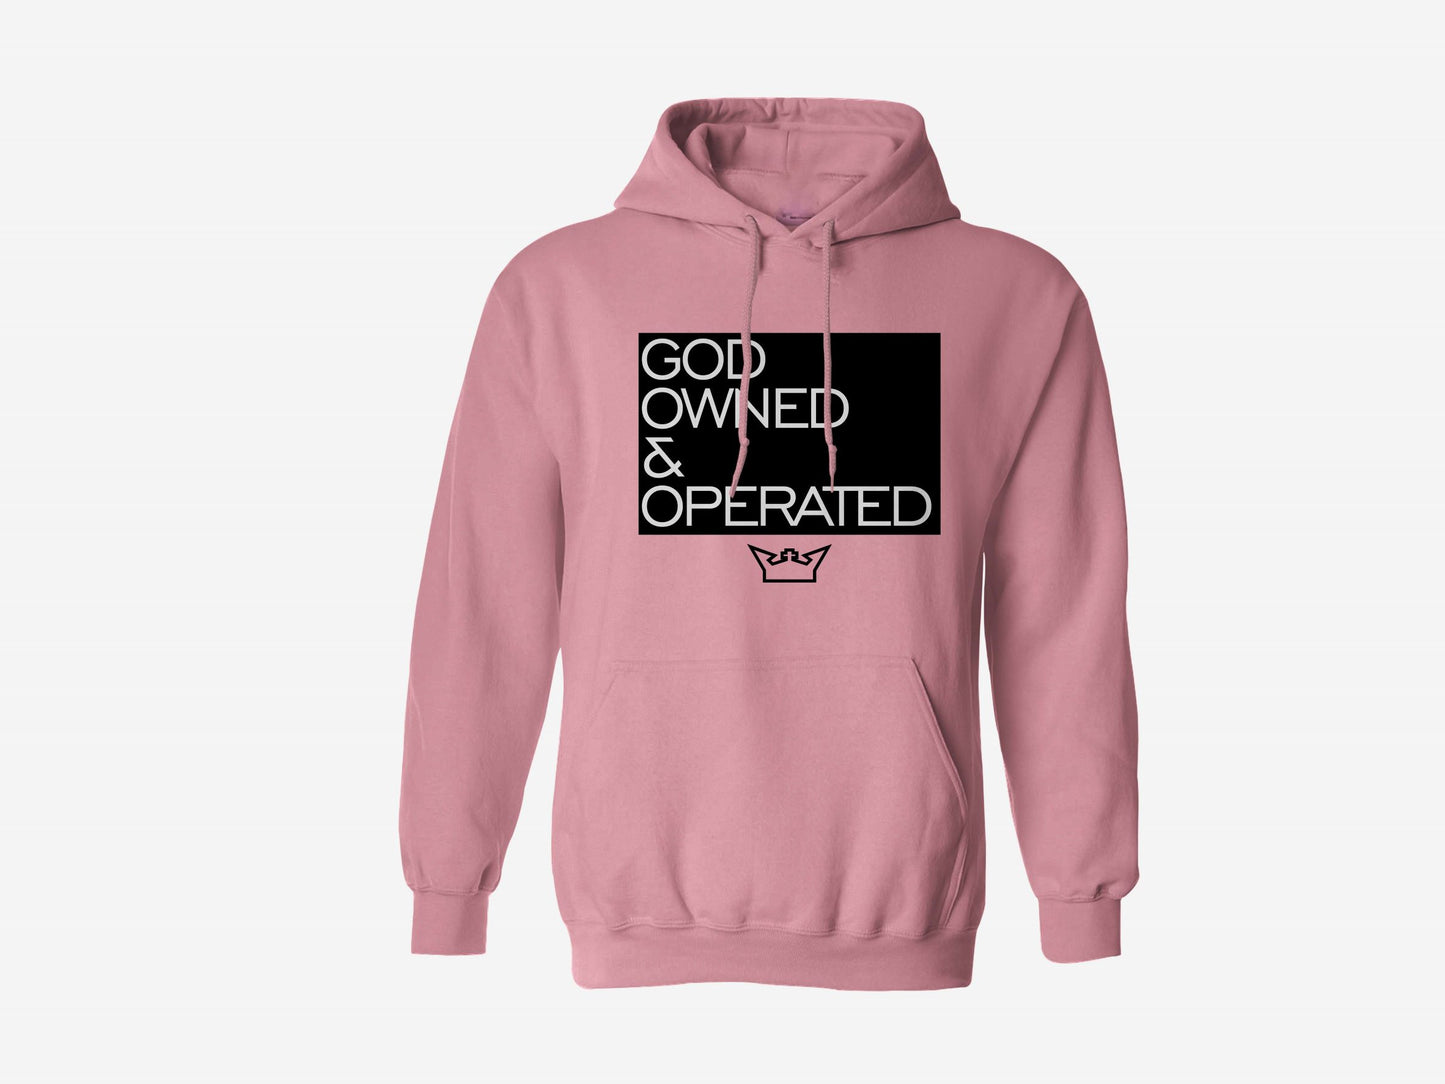 GOD OWNED & OPERATED HOODIE